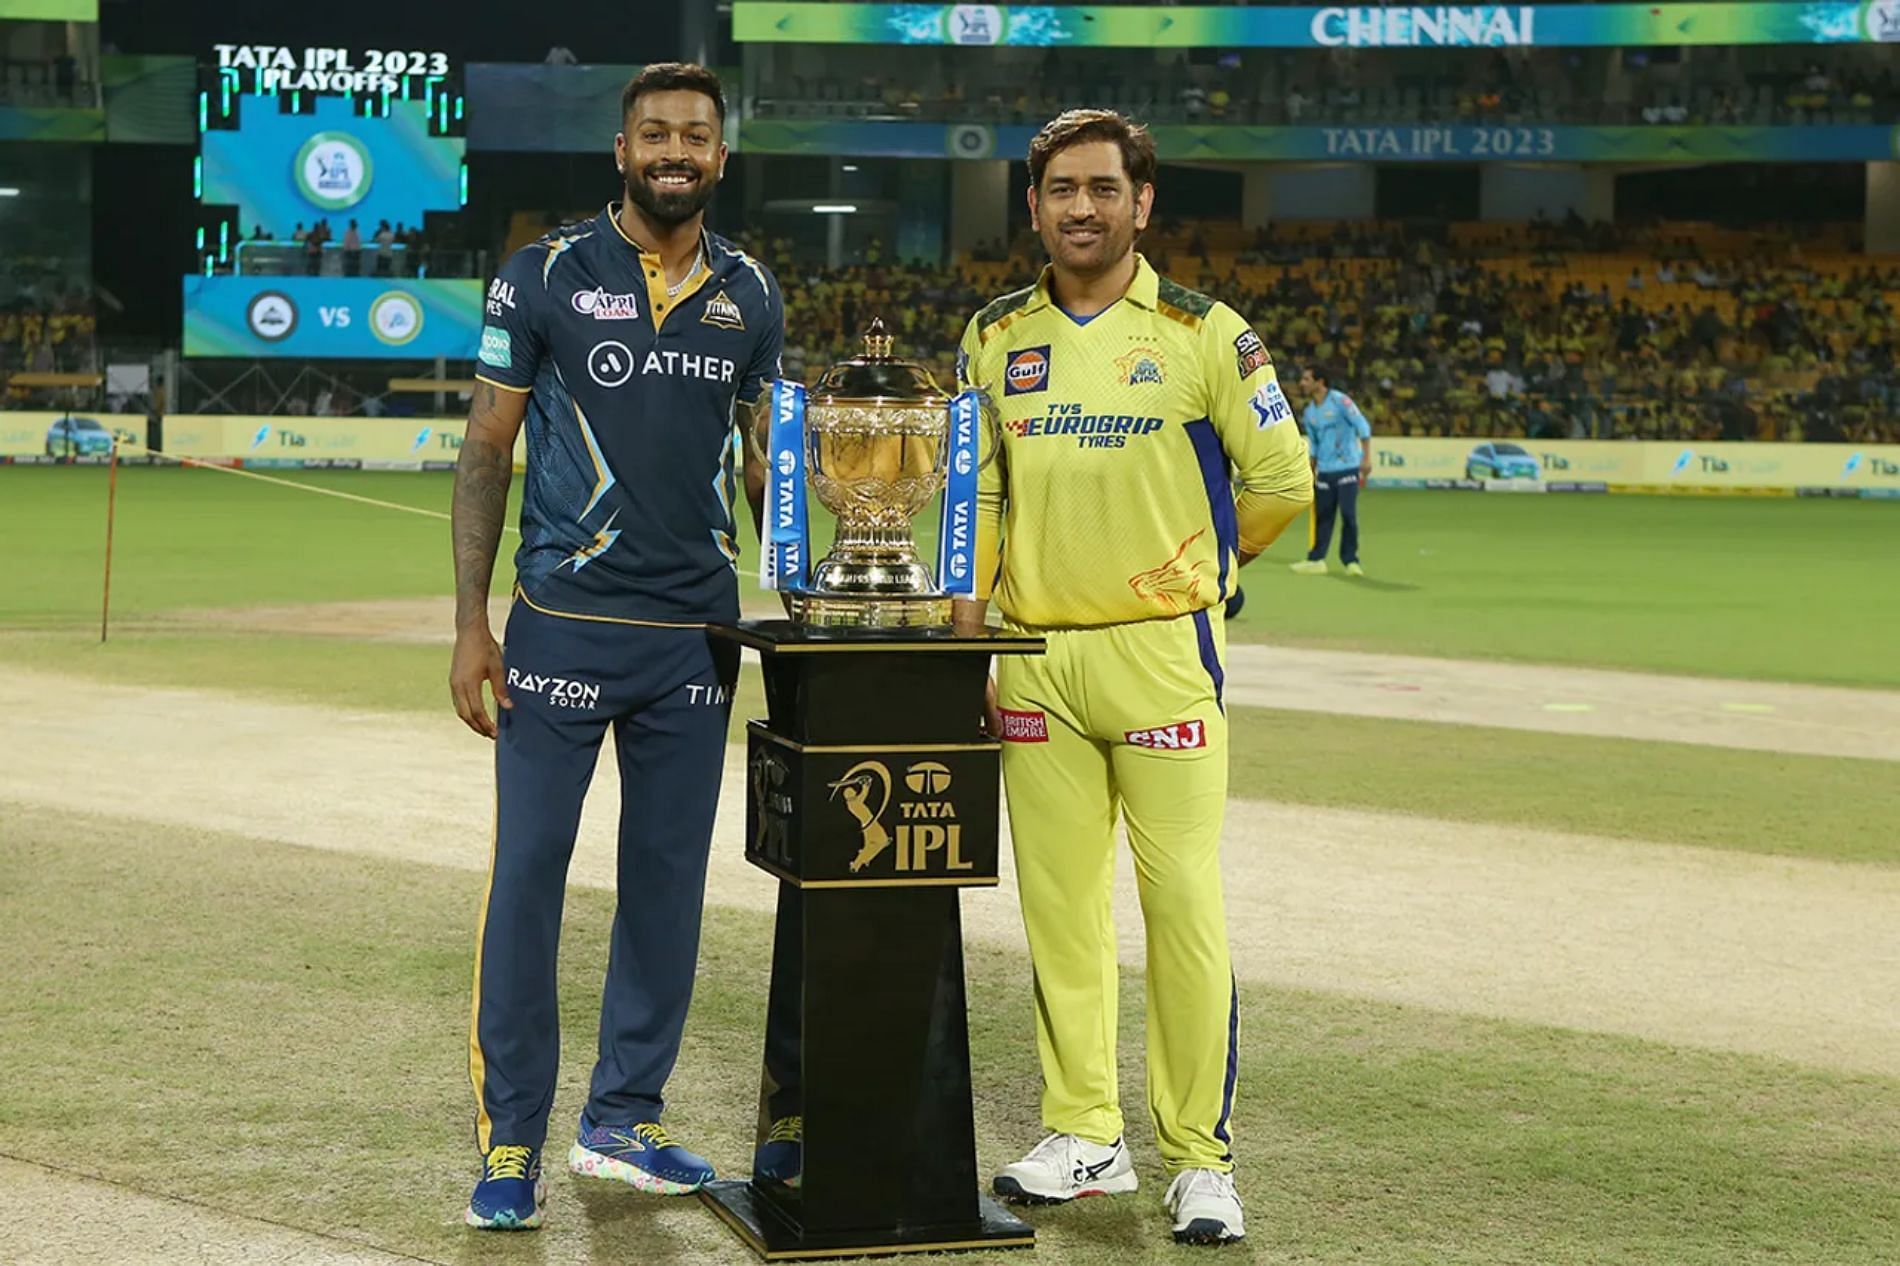 CSK vs GT, IPL 2023 Final: Where to watch and live streaming details in India